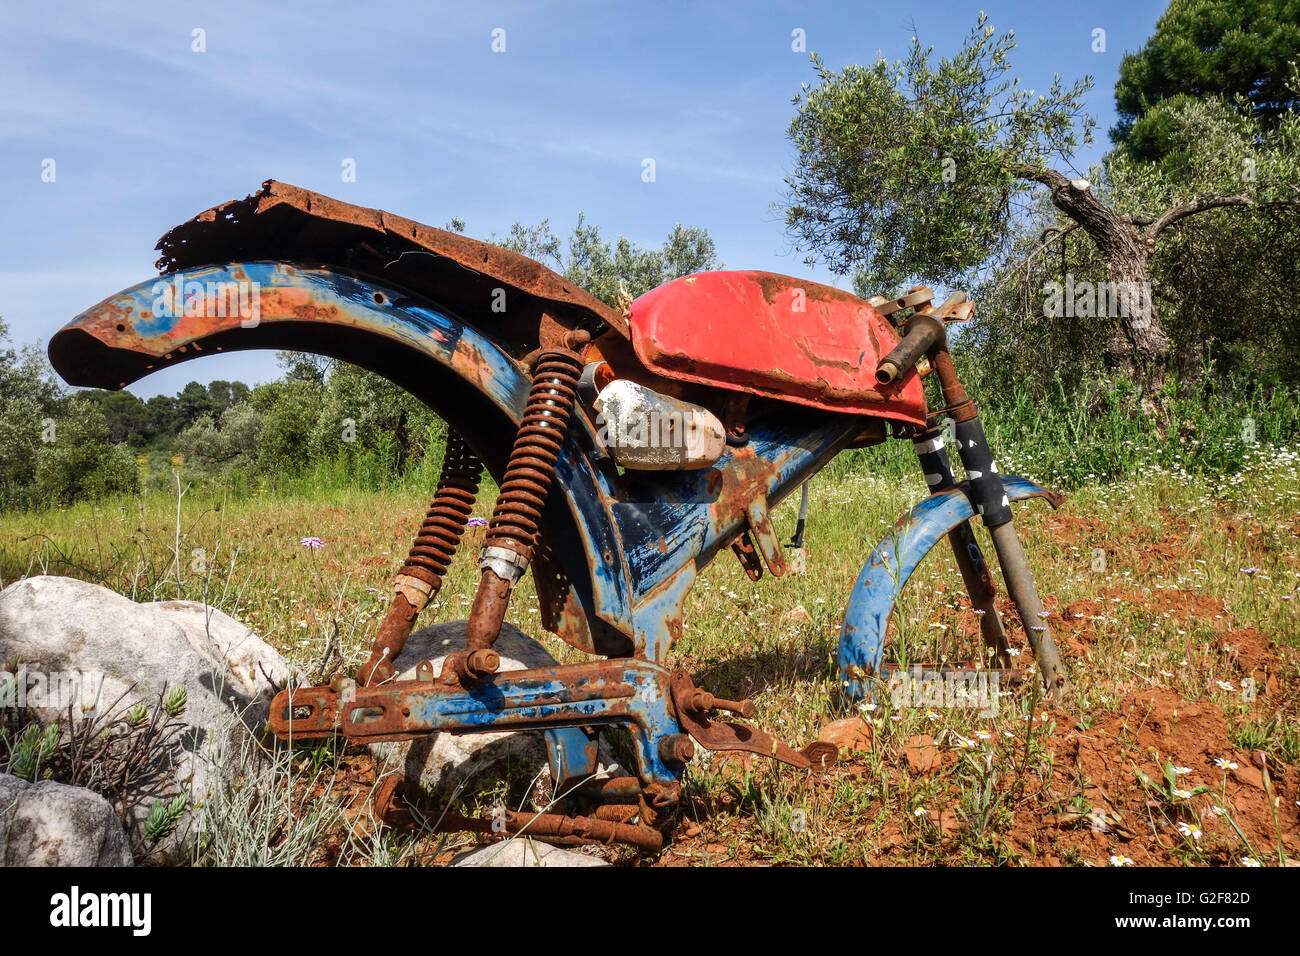 Rusty Old dilapidated classic bike left behind in olive orchards, Spain. Stock Photo